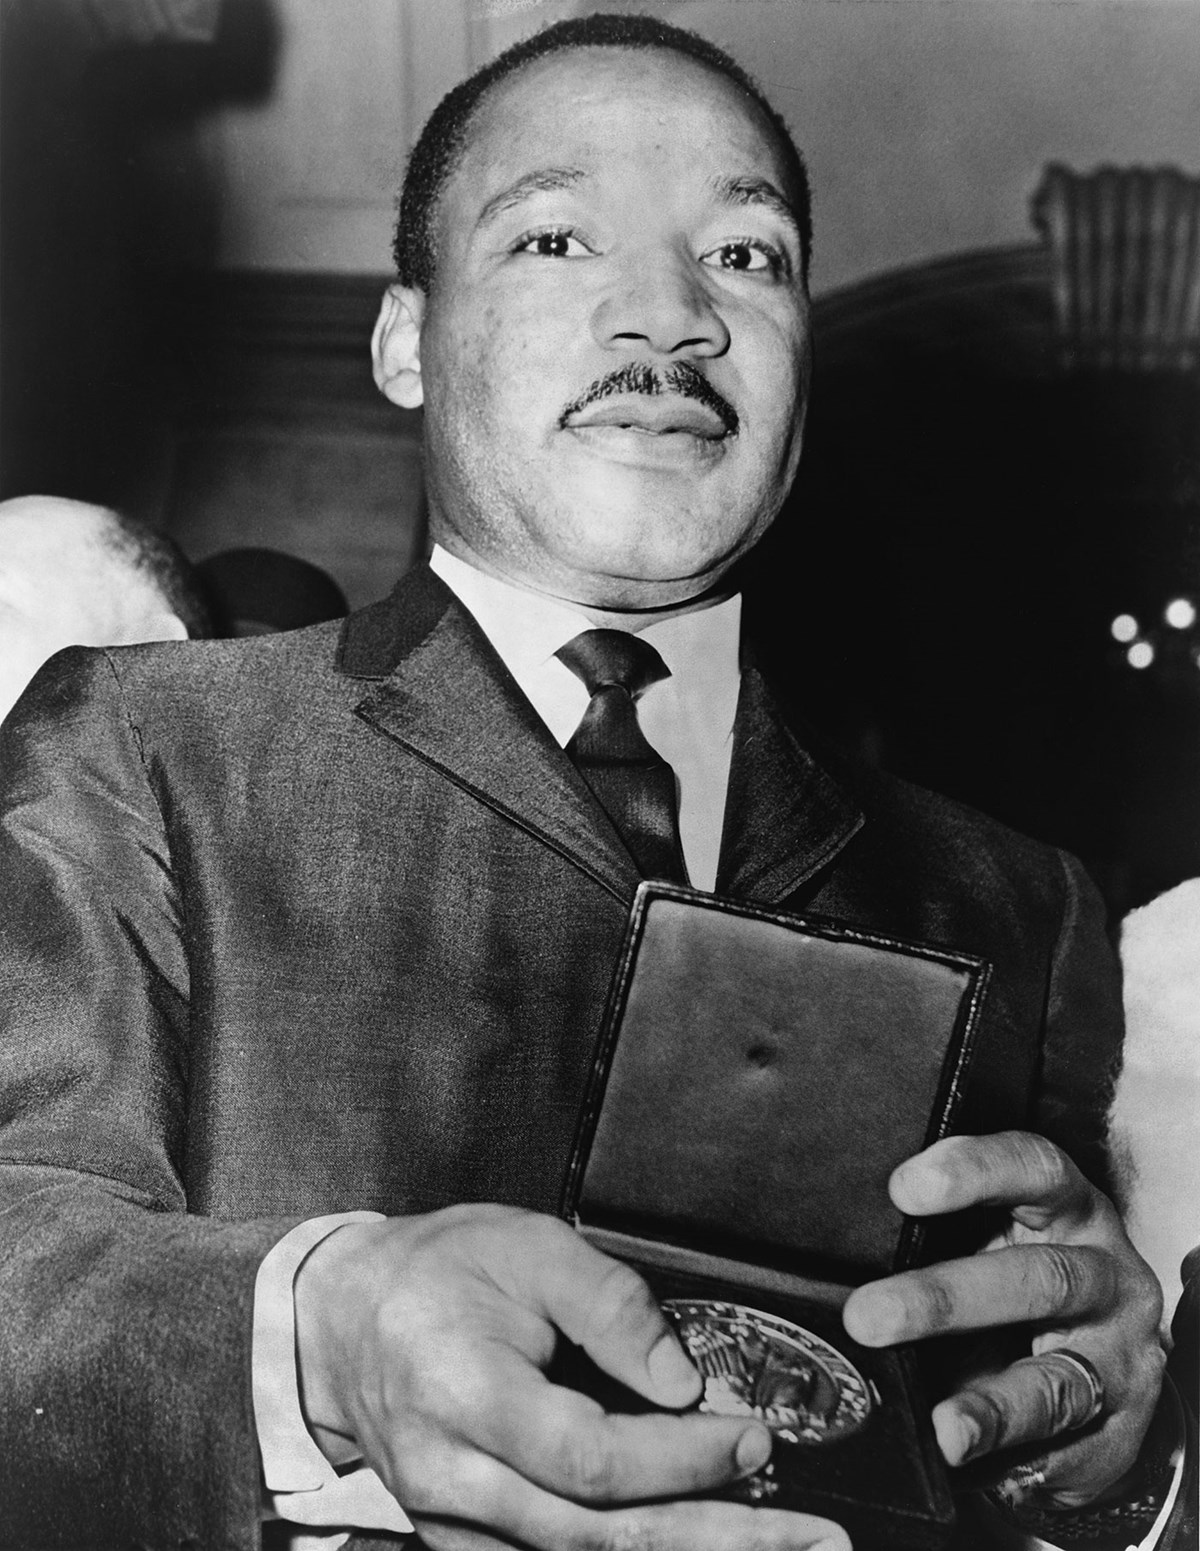 Dr. Martin Luther King, Jr. holding a Nobel Peace prize. In 1964 Martin Luther King, Jr. was awarded the Nobel Peace Prize for his dynamic leadership of the Civil Rights movement and steadfast commitment to achieving racial justice through nonviolent action.